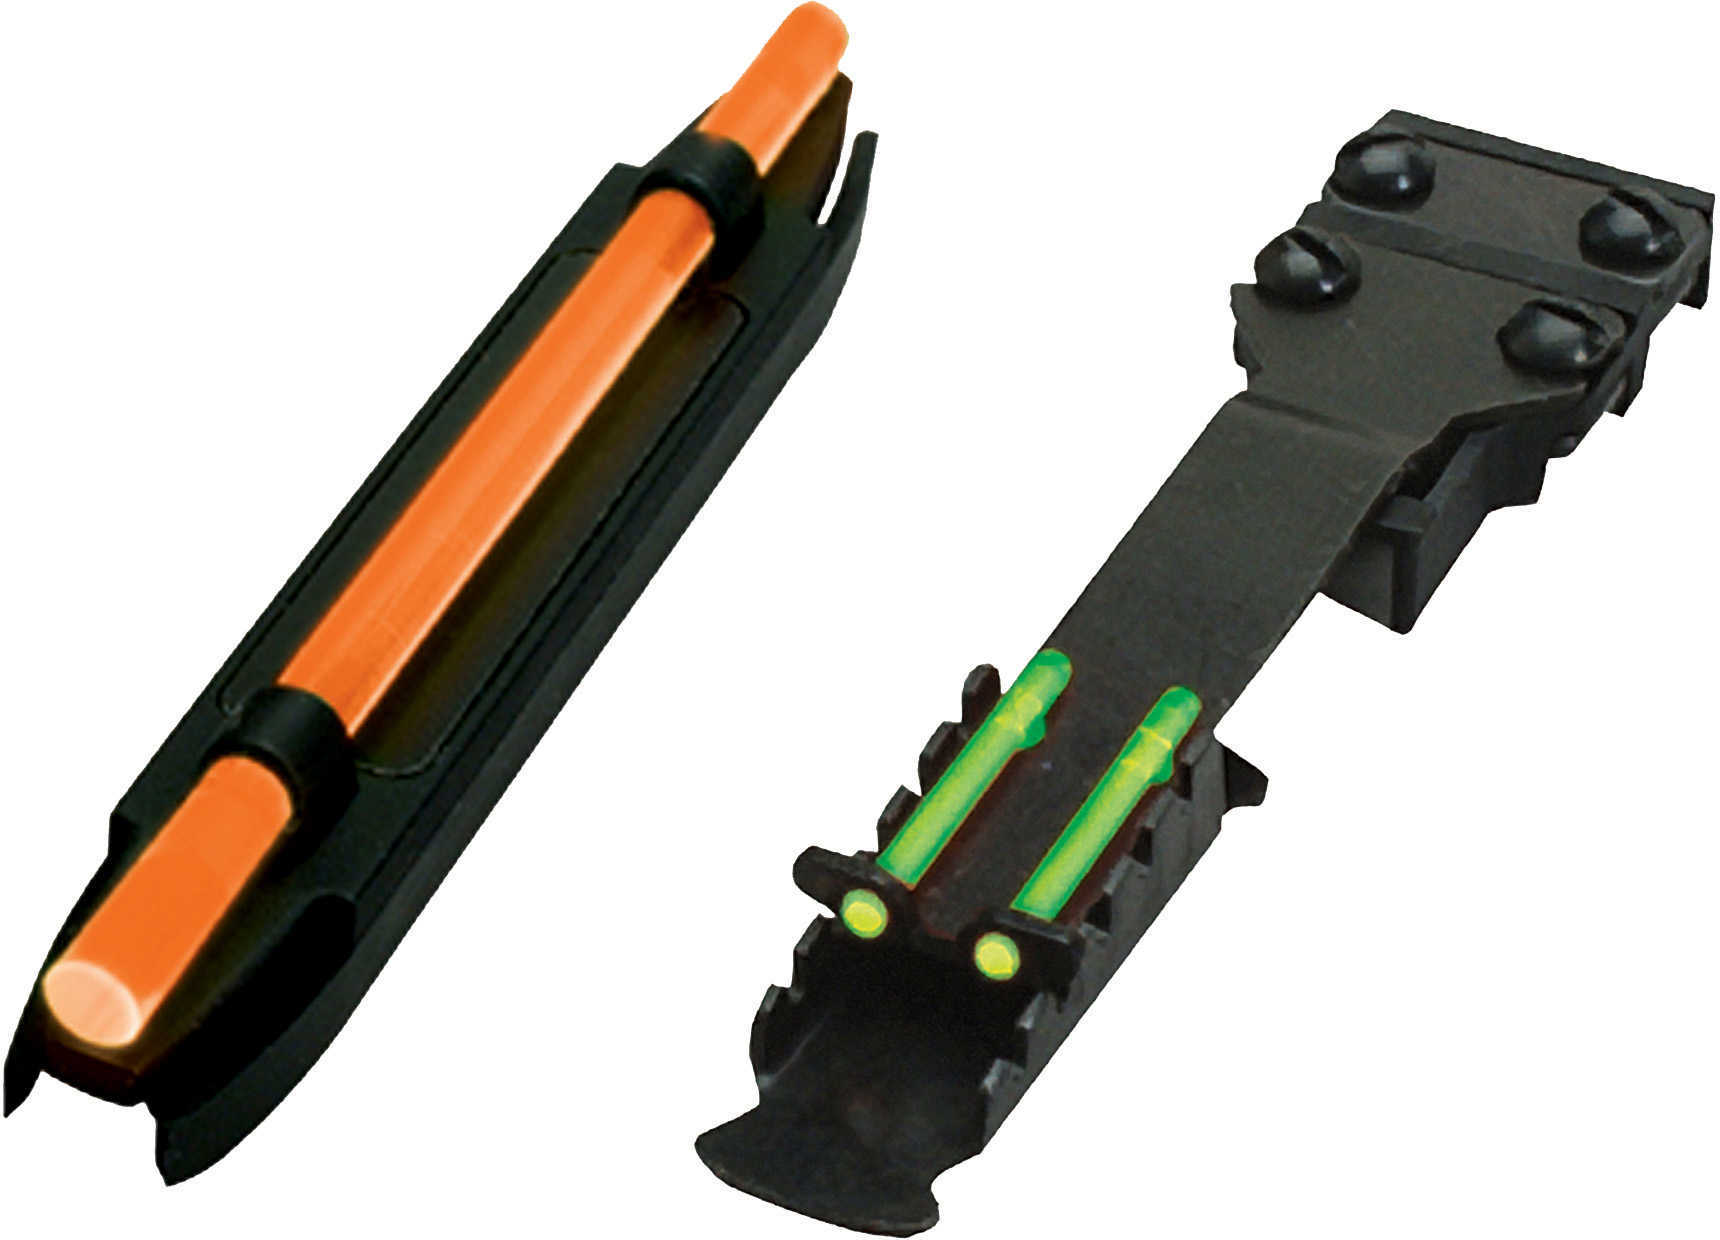 Hi-Viz Narrow Magnetic Shotgun Front and Rear Sight Combo Pack. Fits shotguns with ribs from .328" to .437" (1/4" to 7/1